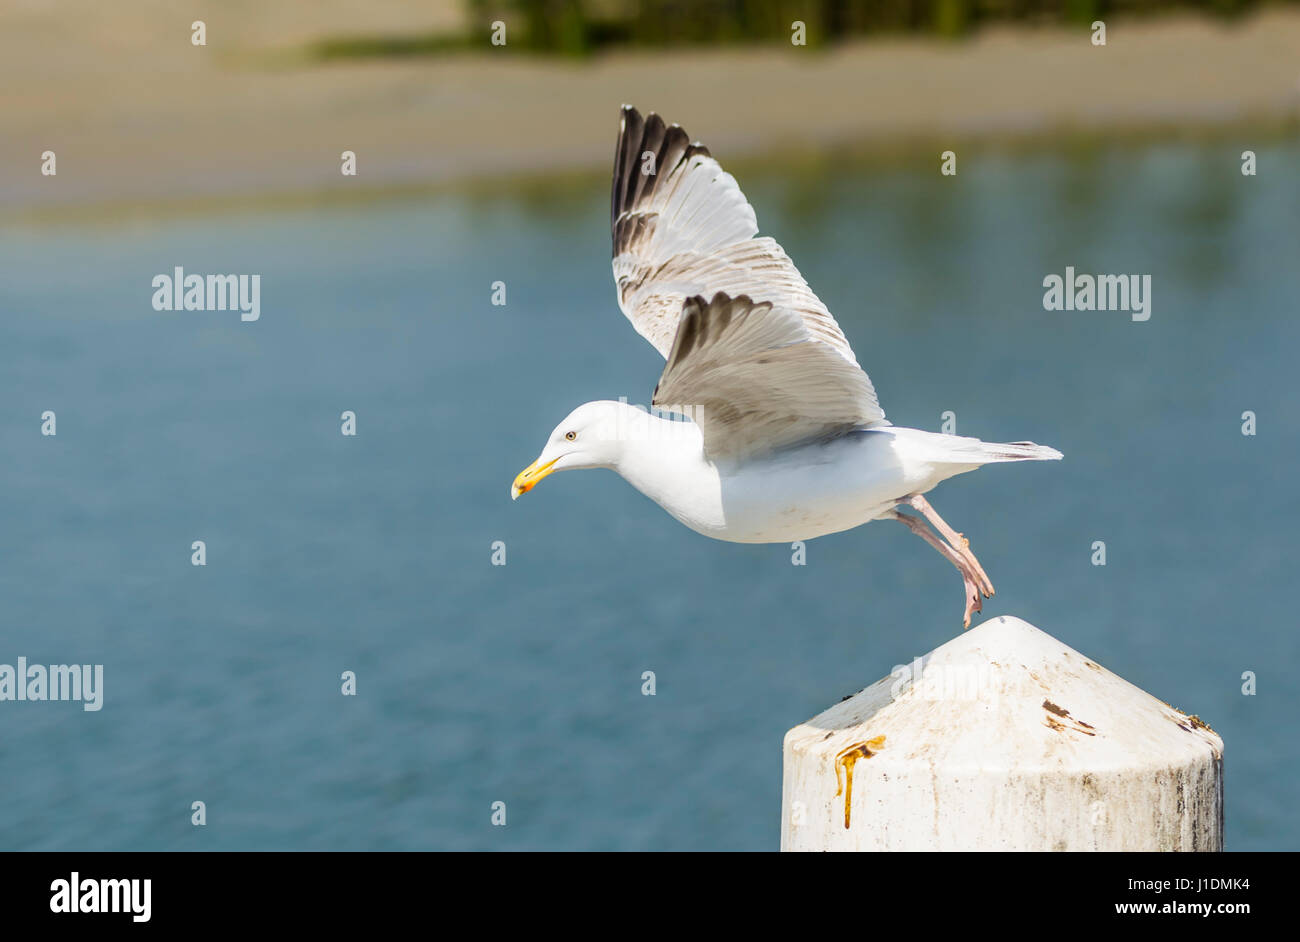 Side view of a seagull taking off and flying over water in the UK. Stock Photo